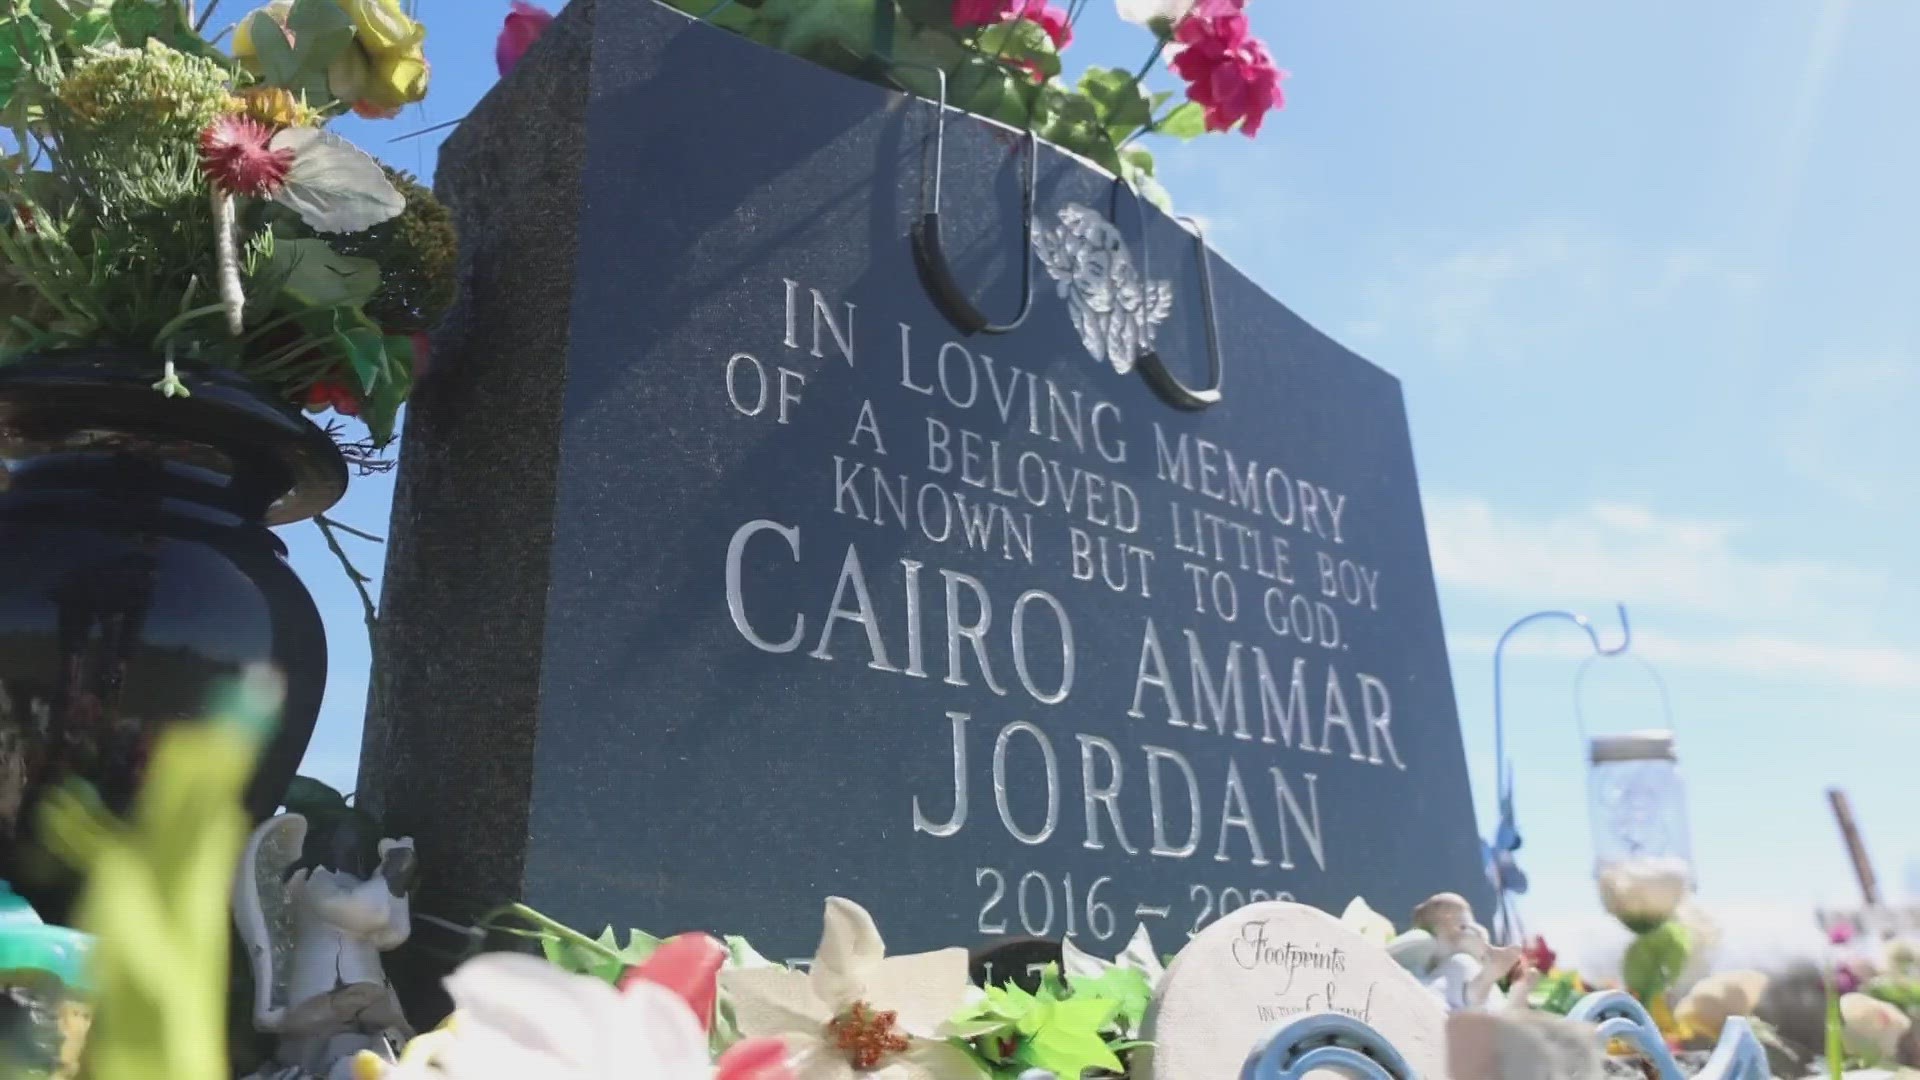 A southern Indiana community has adopted the 5-year-old boy as one of their own. On Tuesday, a small group gathered at his gravesite to honor his memory.